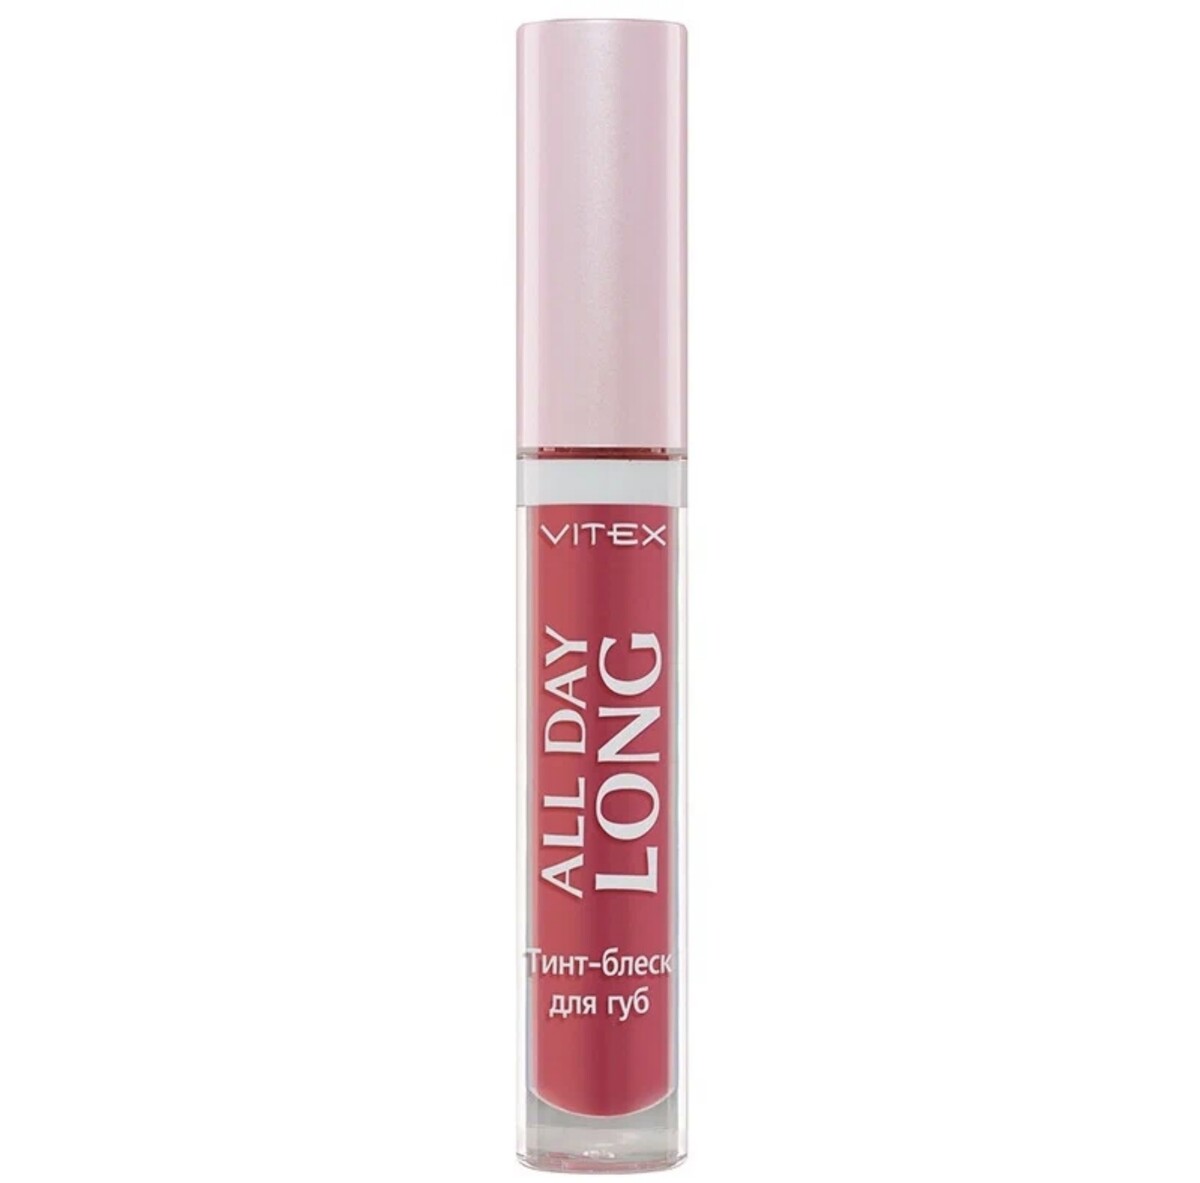 Vitex -   all day long,  34 all day pink nude, 3